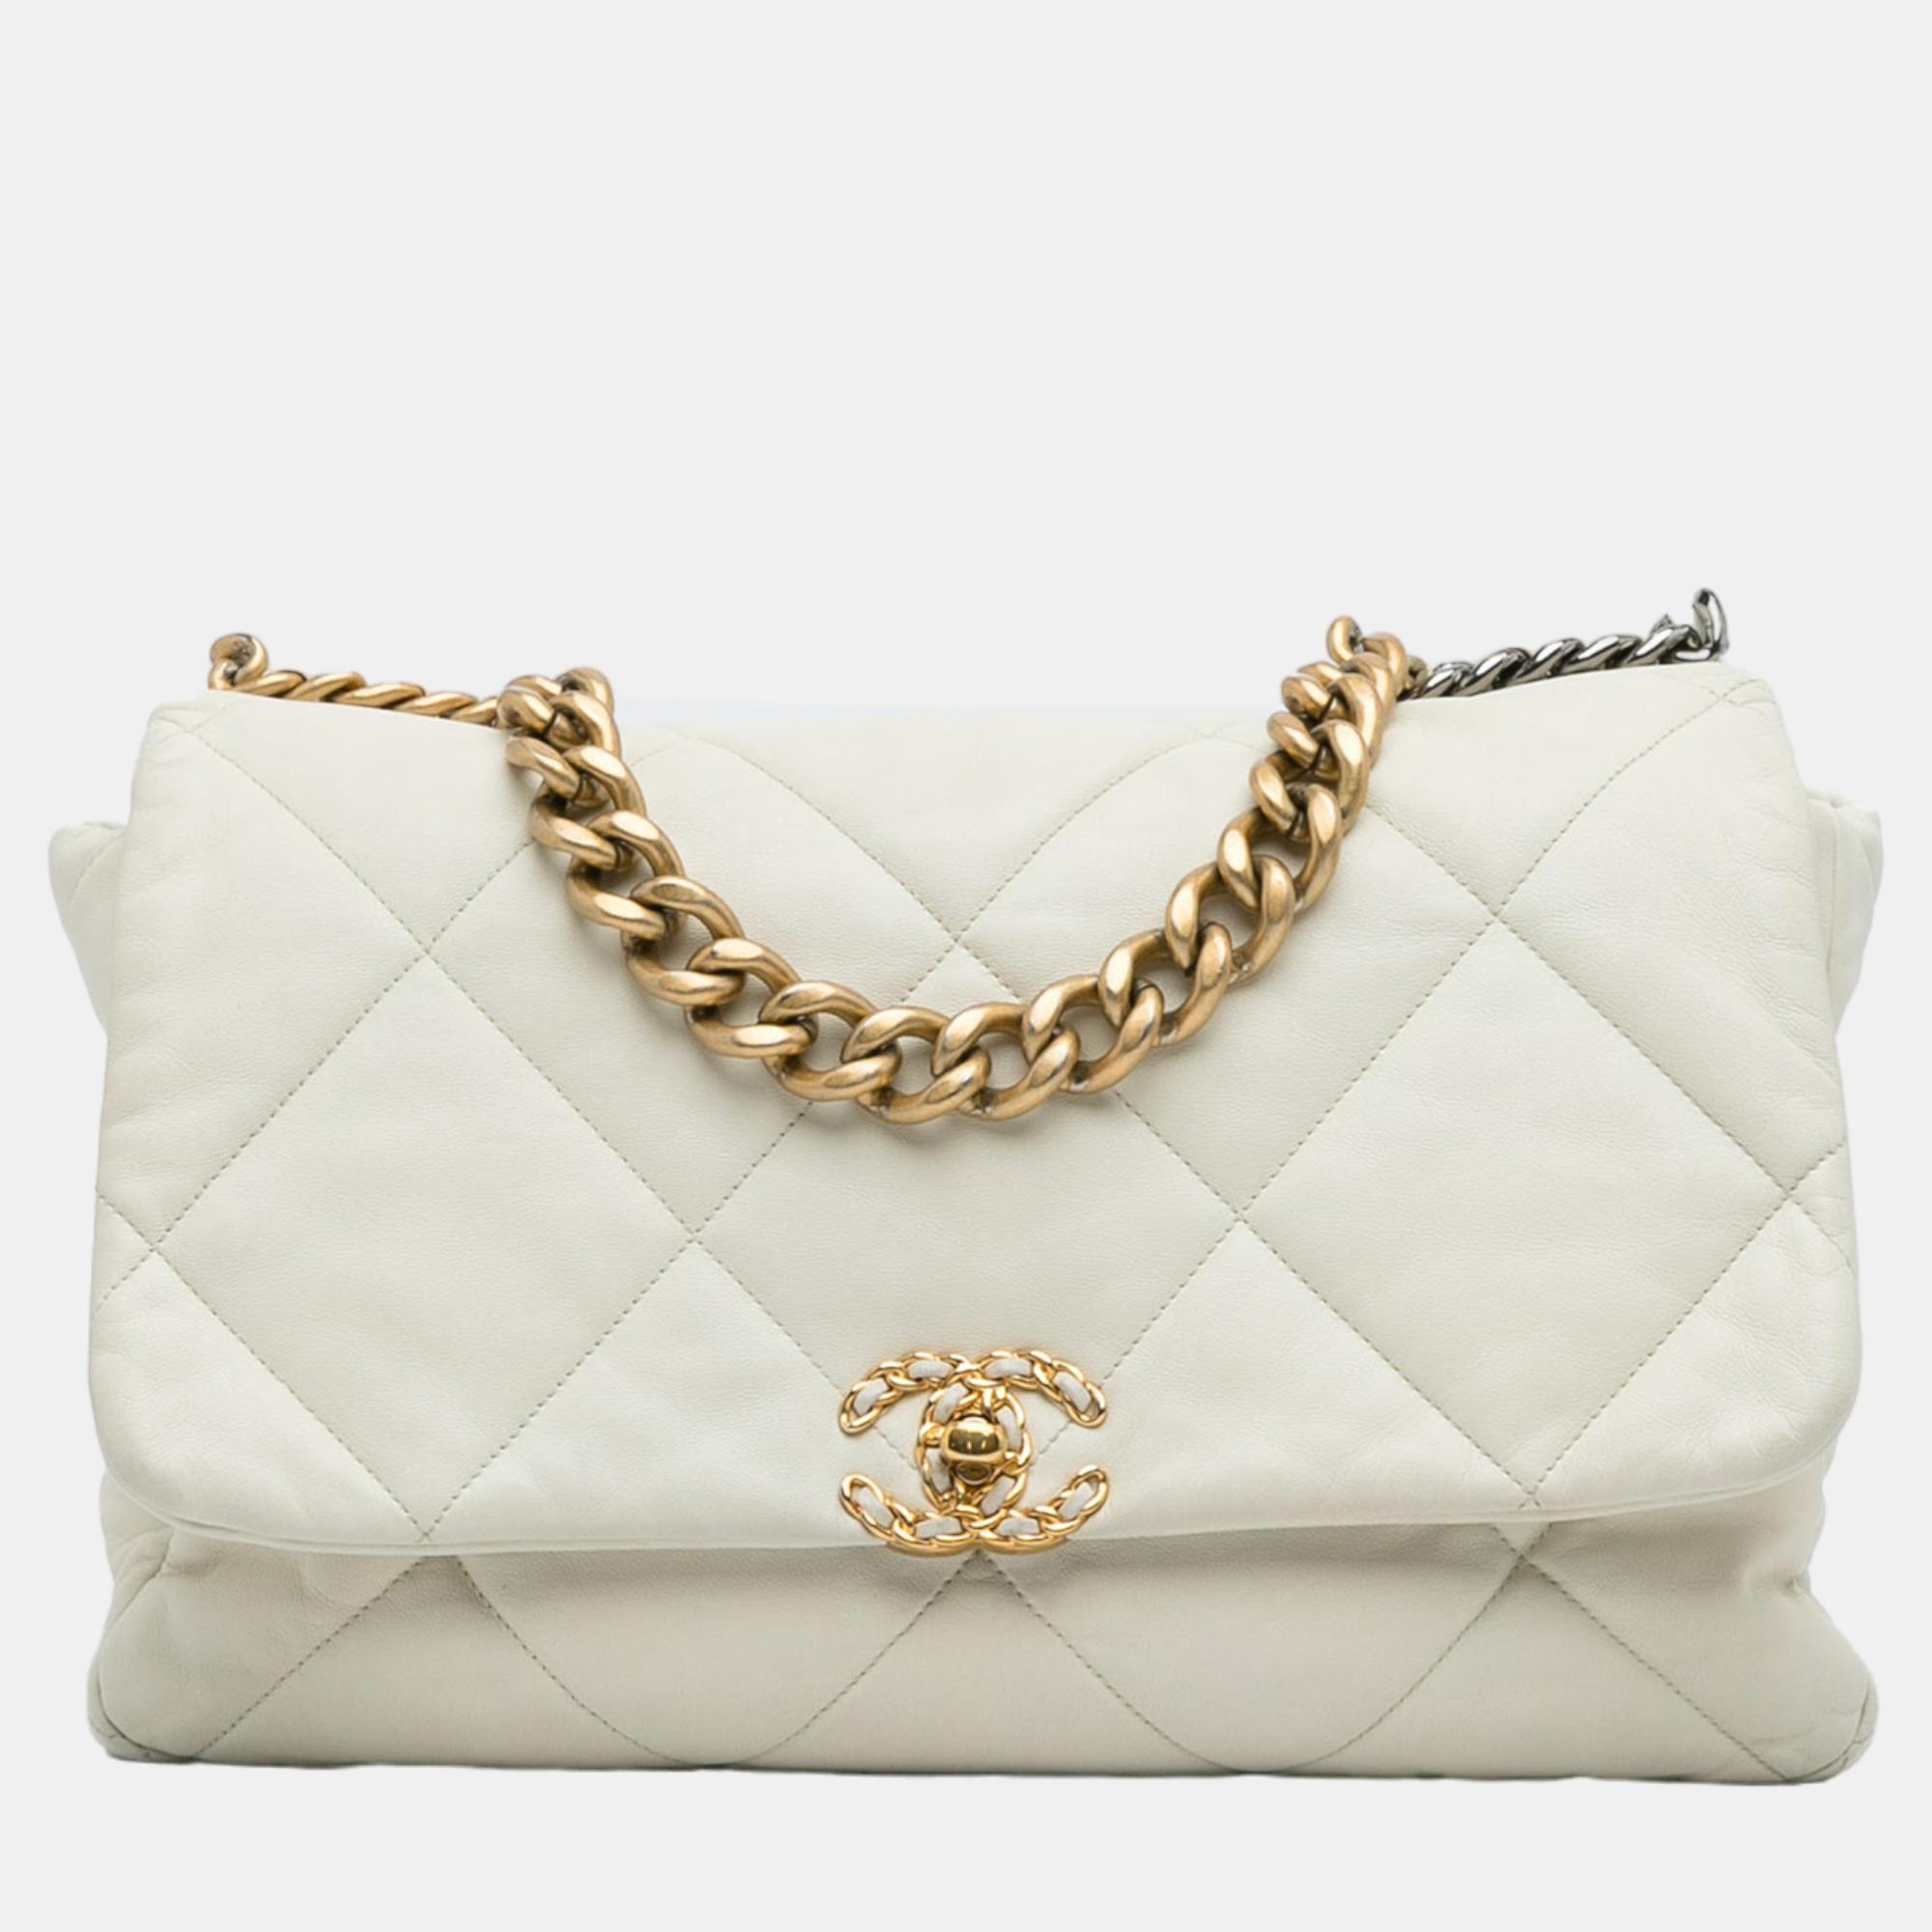 Pre-owned Chanel White Maxi Lambskin 19 Flap